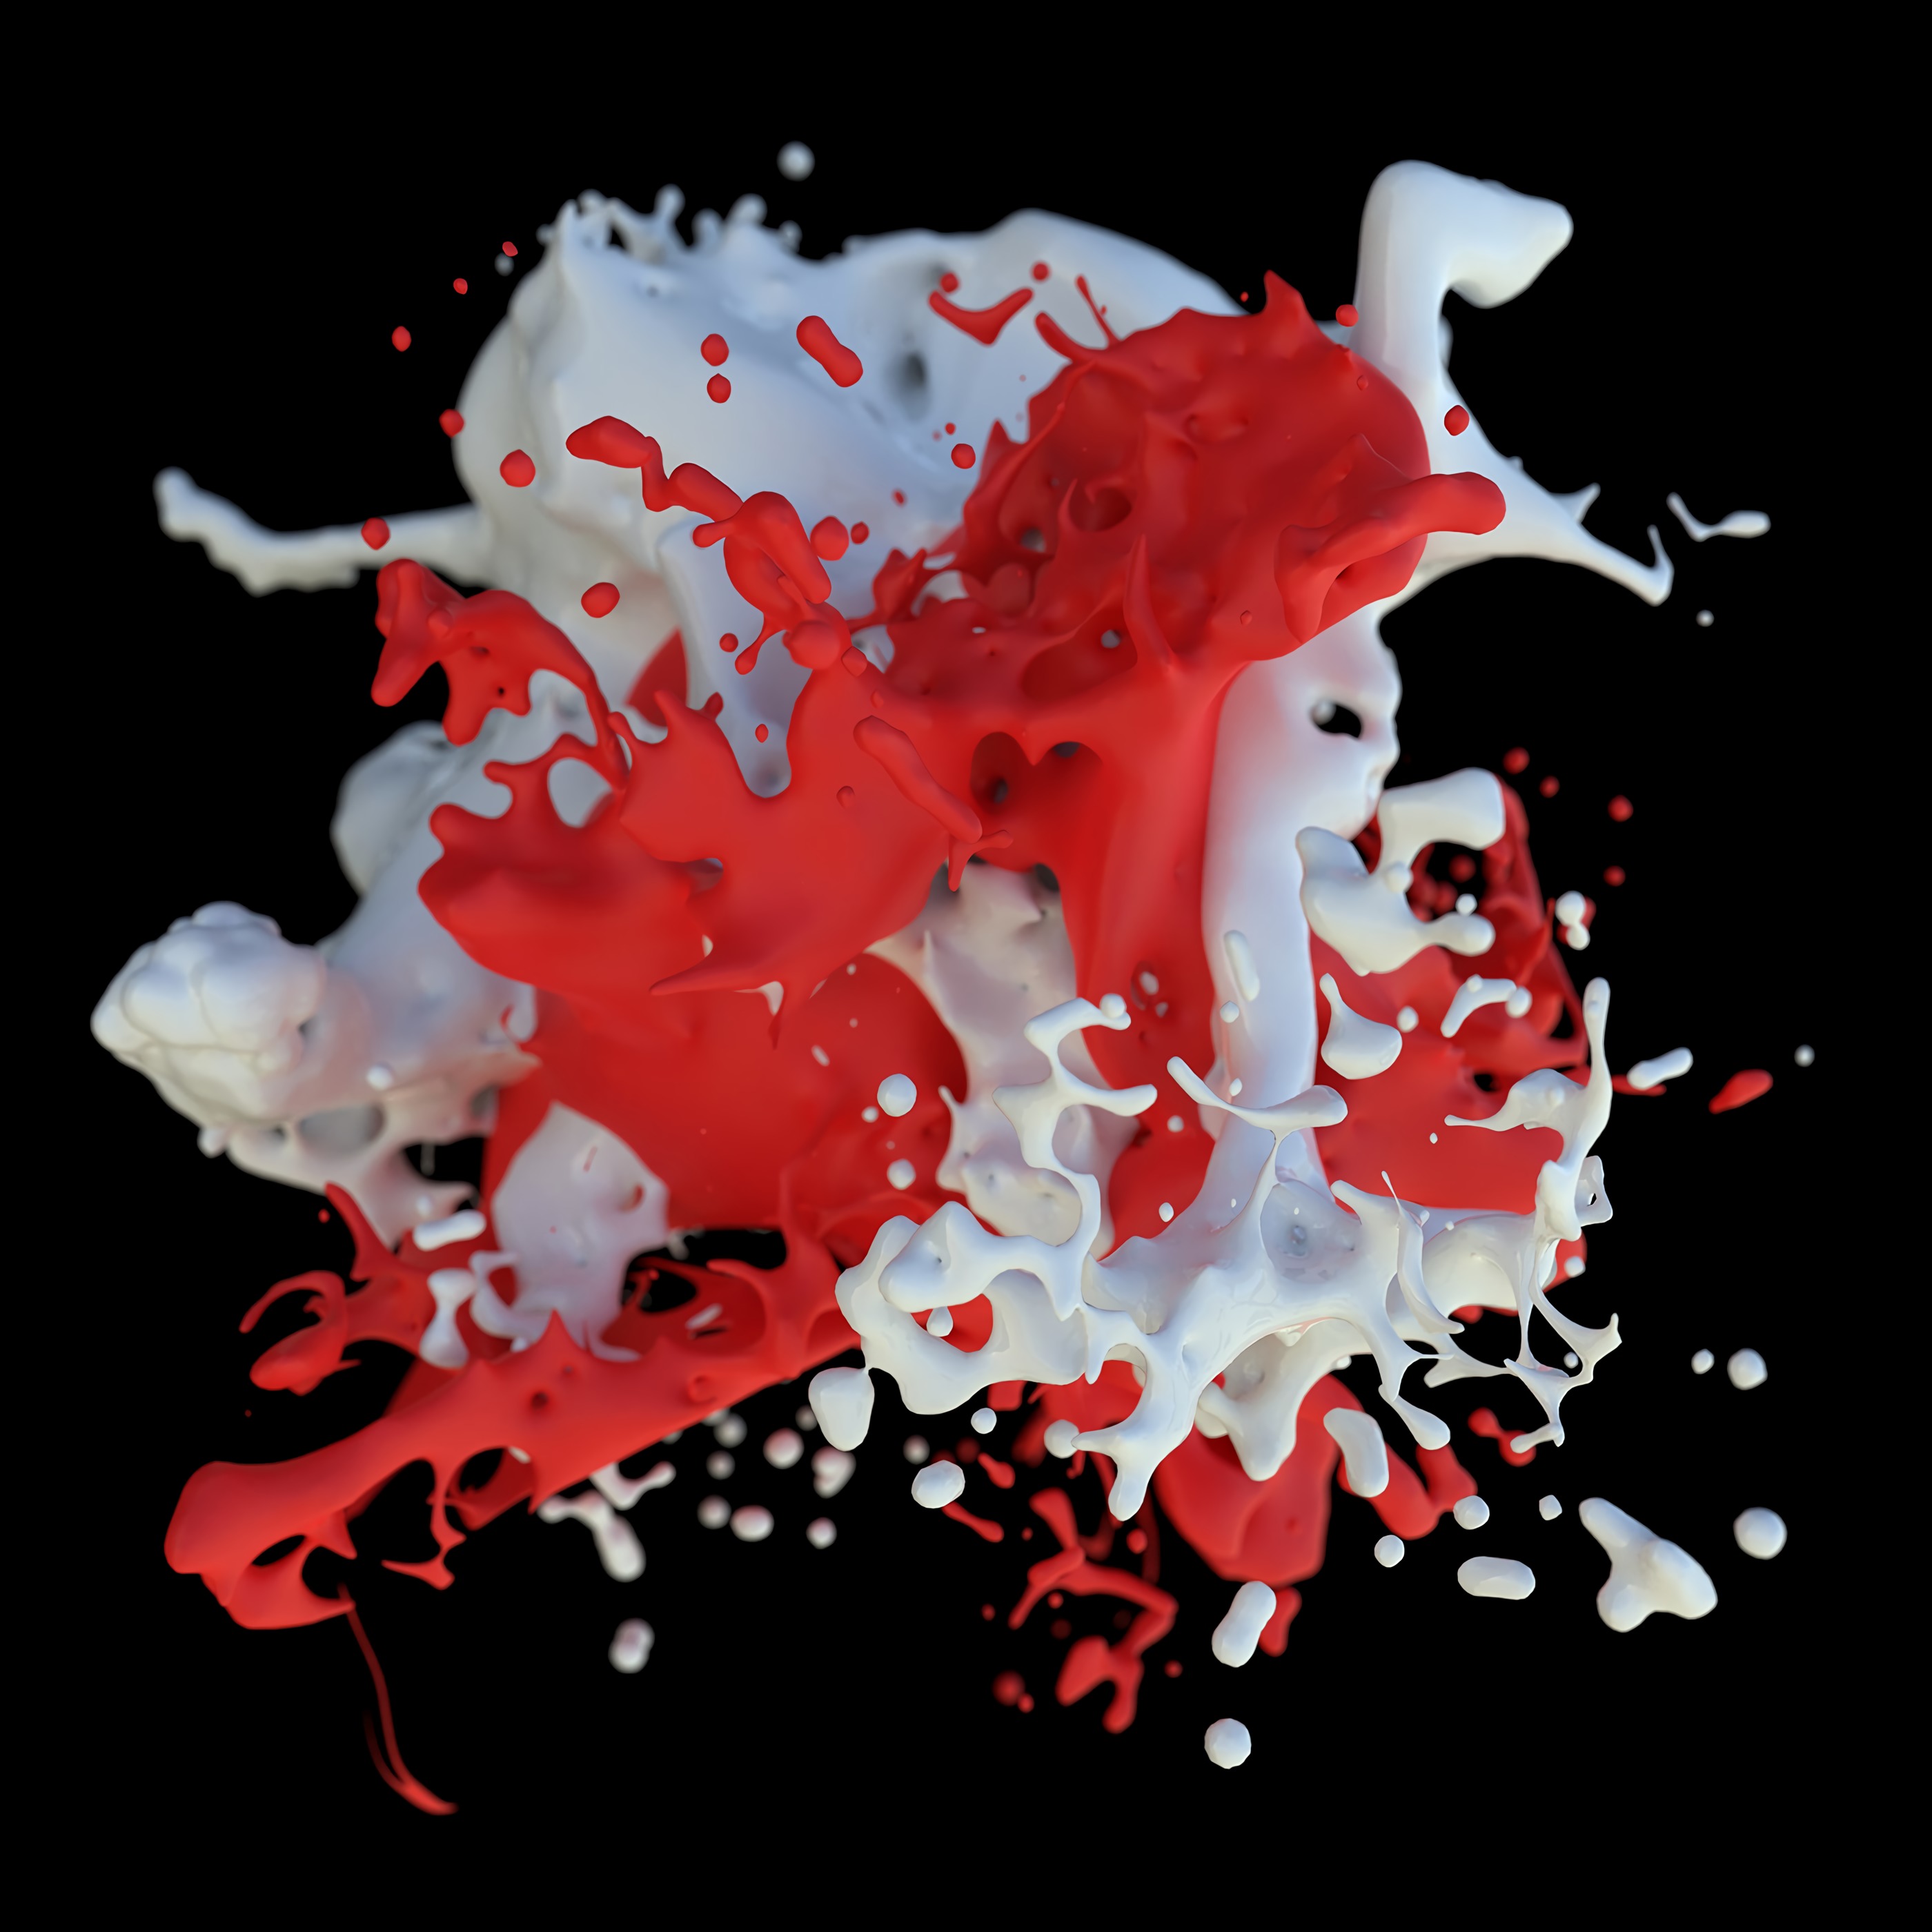 mixing, spray, 3d, splash, white, red, paint, clot High Definition image